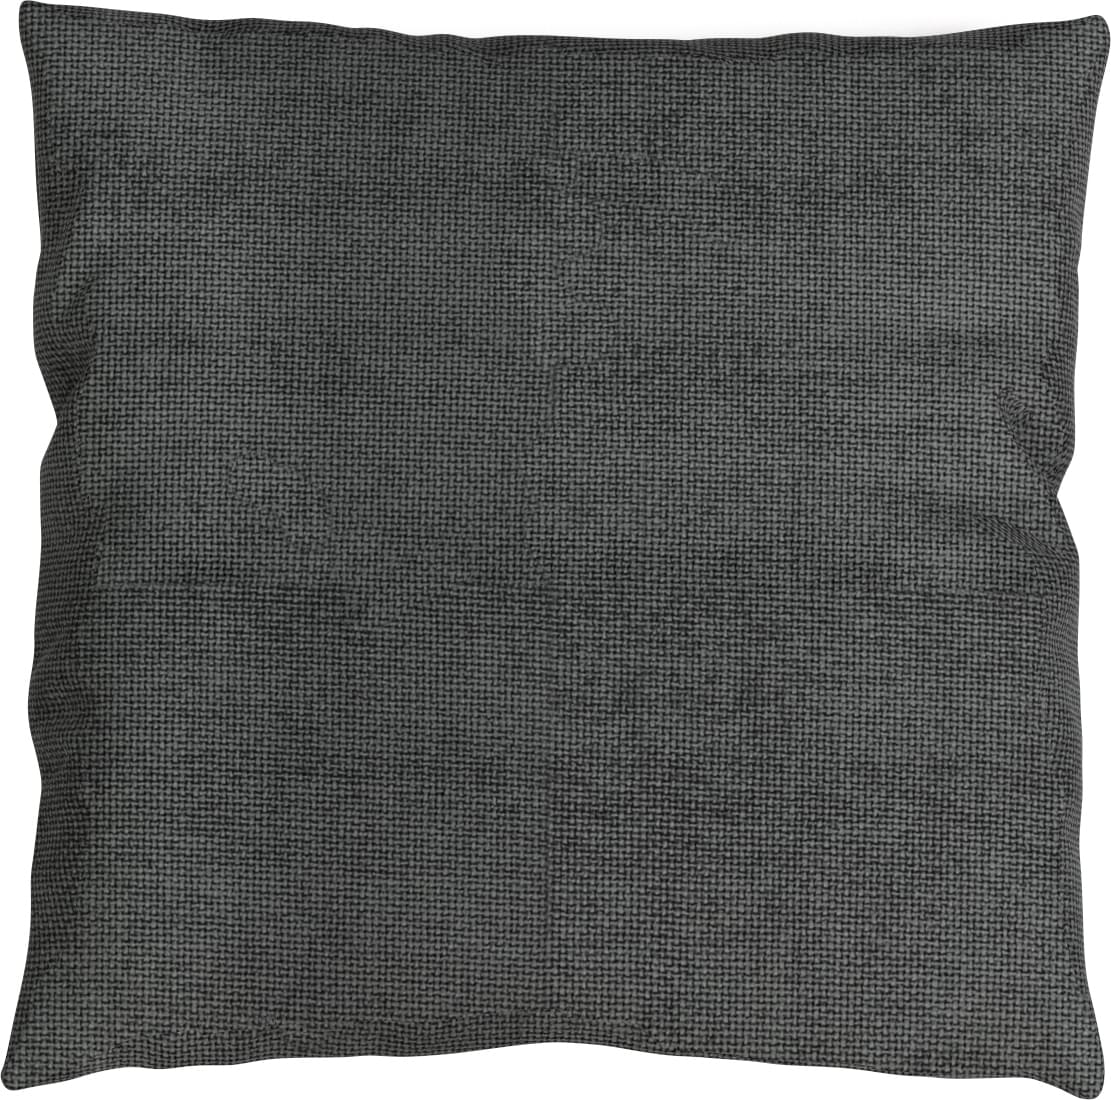 24 Inch Scatter Cushion